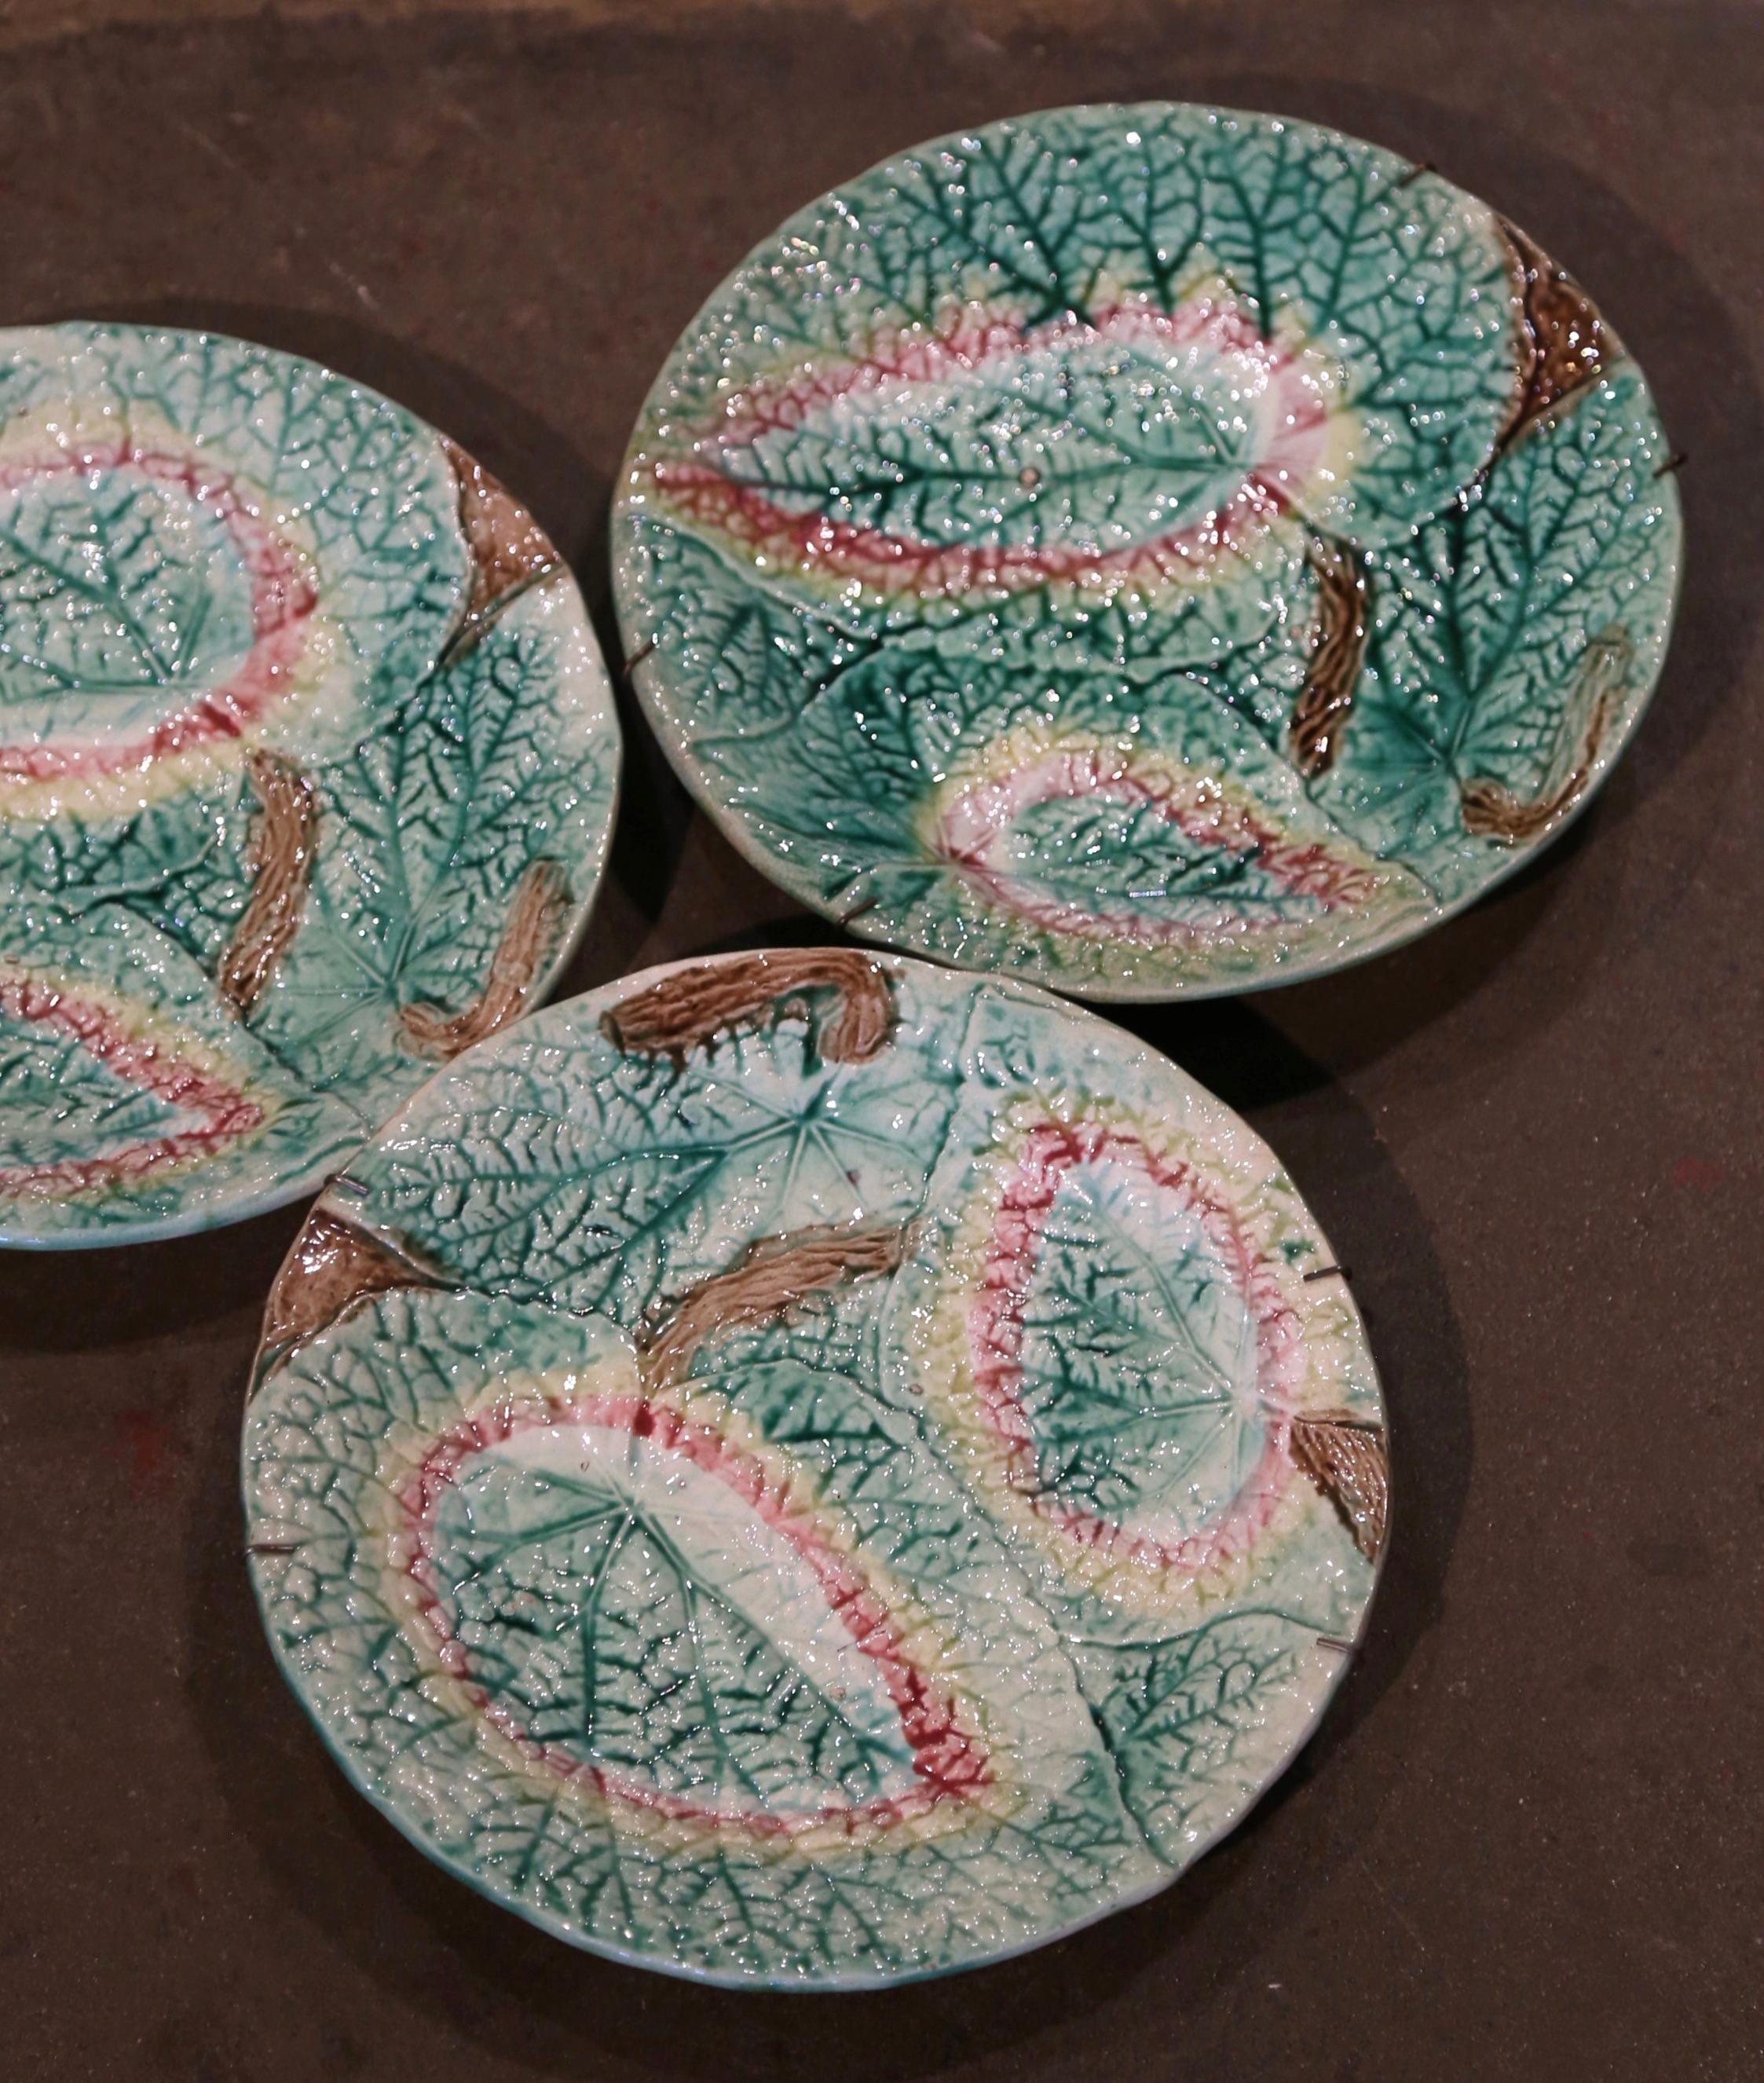 Decorate a wall of a shelf with this colorful set of decorative plates. Crafted in England circa 1880, each plate is heavily textured and brightly colored with graduations of pale green to celery, with some pink and brown accents, further